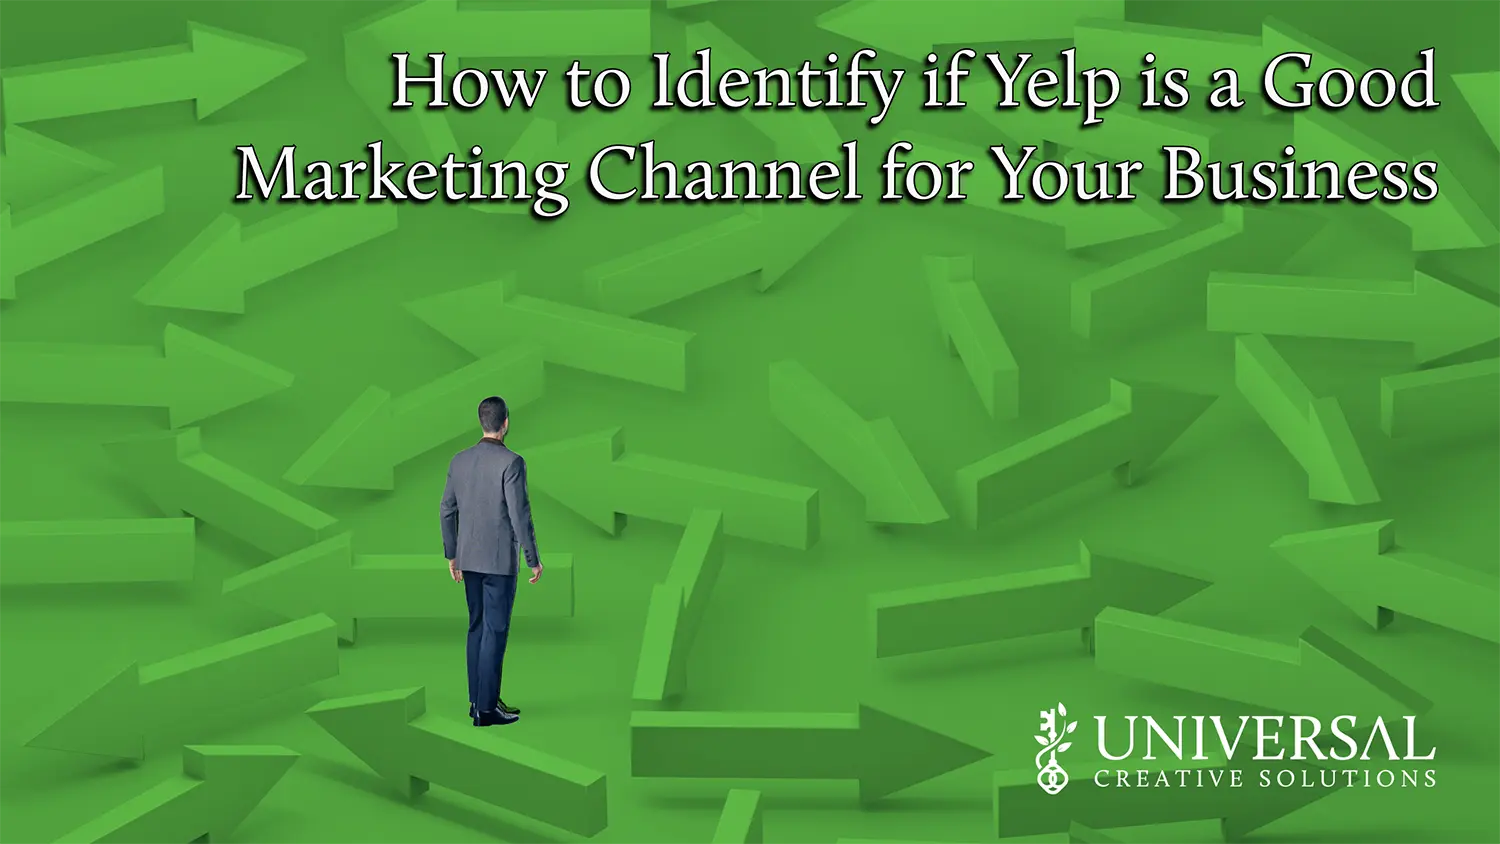 How to Identify if Yelp is a Good Marketing Channel for Your Business